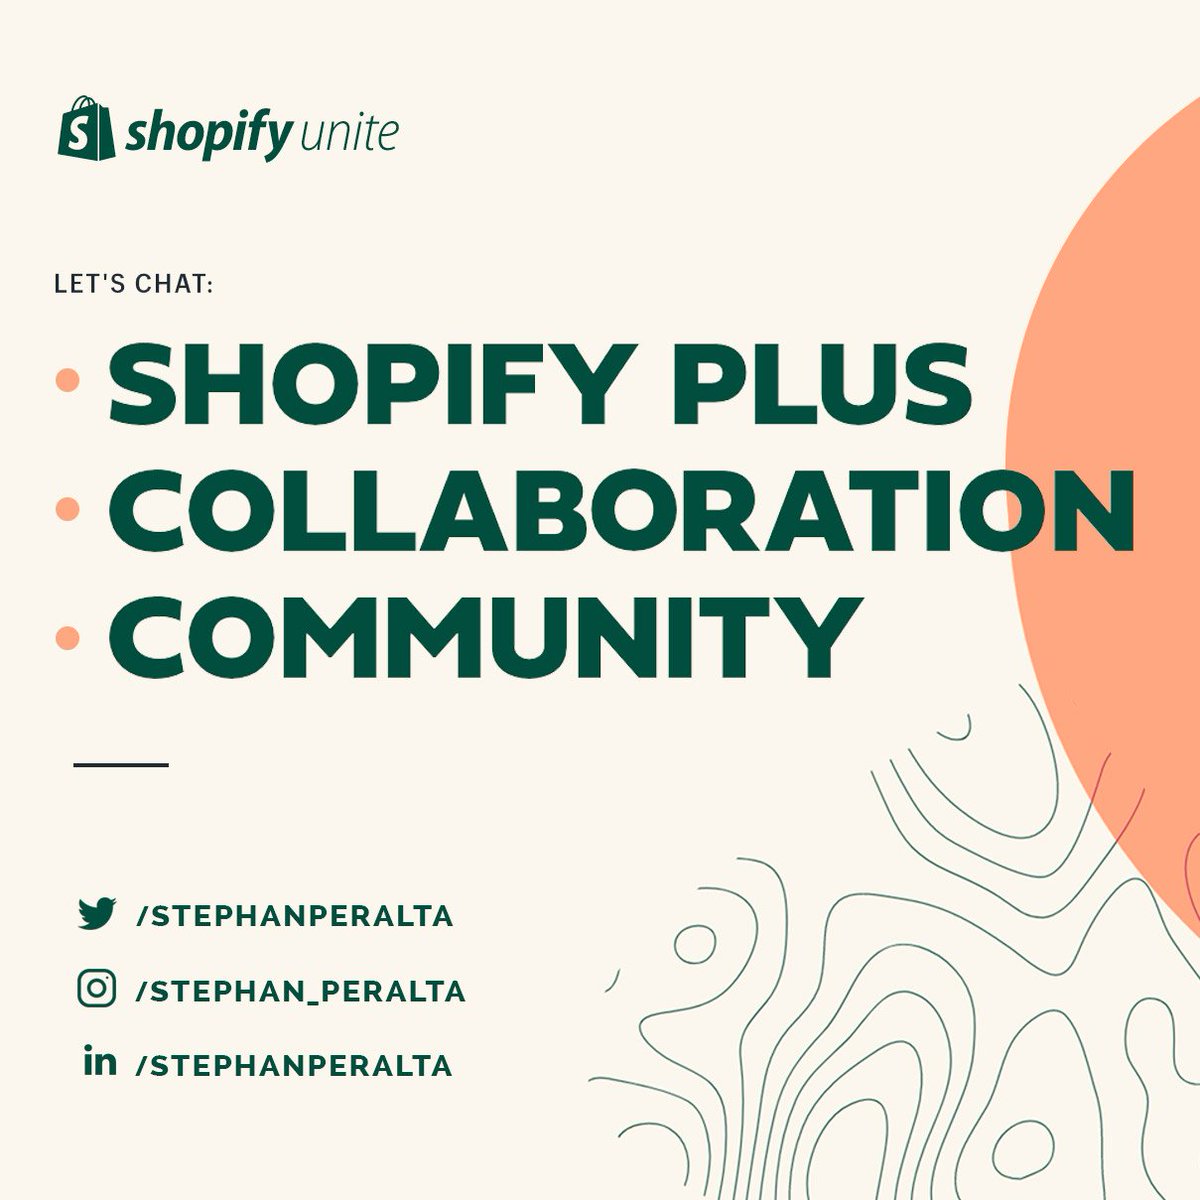 4/4 here we go #ShopifyUnite! Excited to see the ecosystem come together once again to better the #futureofcommerce. I'll be walking around the next few days, come say hi 👋